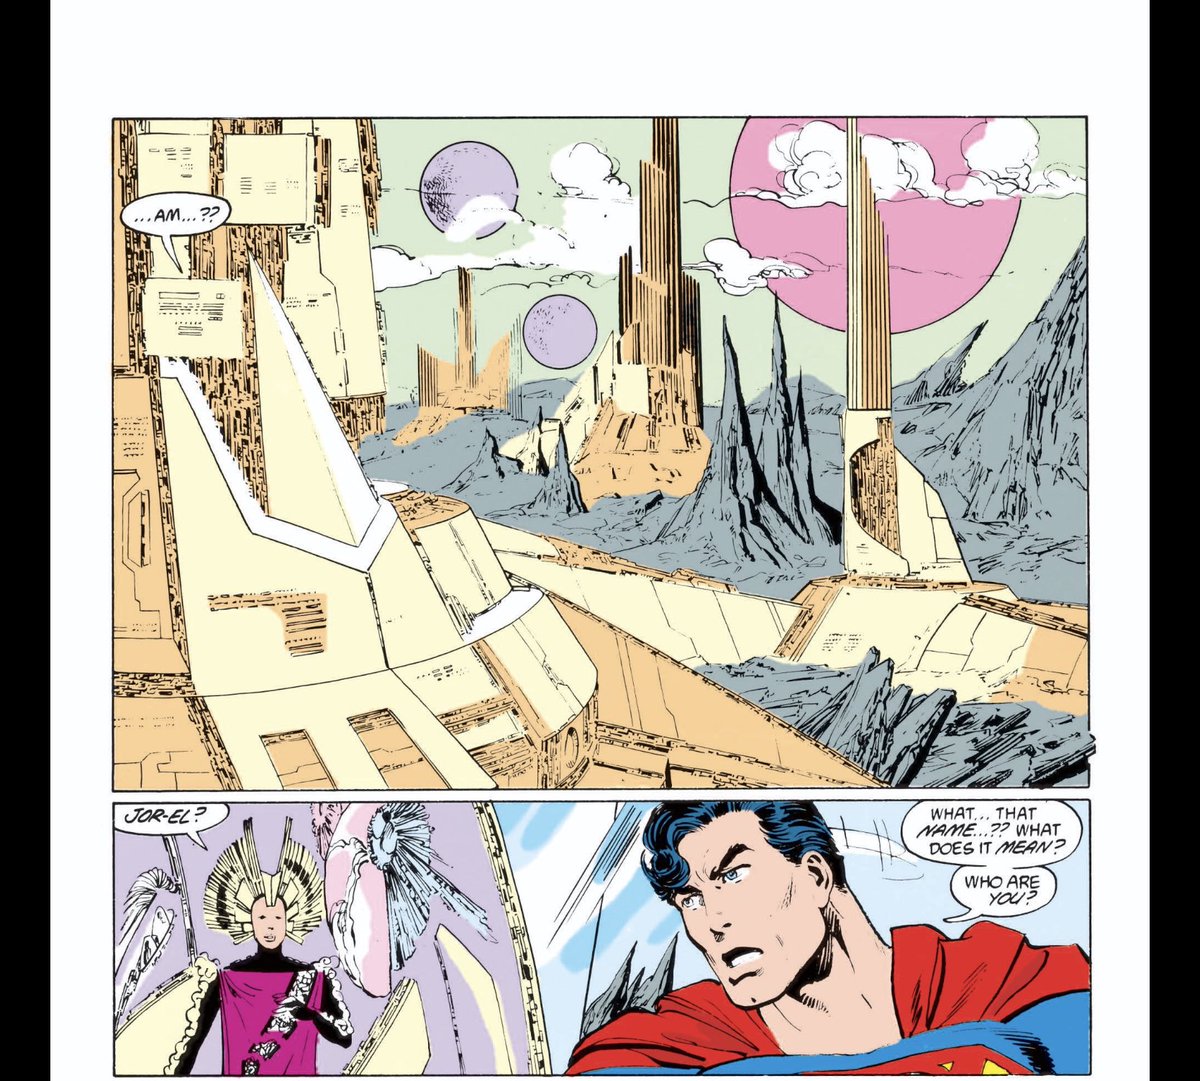 Here’s where Byrne’s decision to keep Krypton out of Clark’s life really pays off. You get this wonderful sequence of pages of Clark just freaking out as Krypton reveals itself to him for the first time.